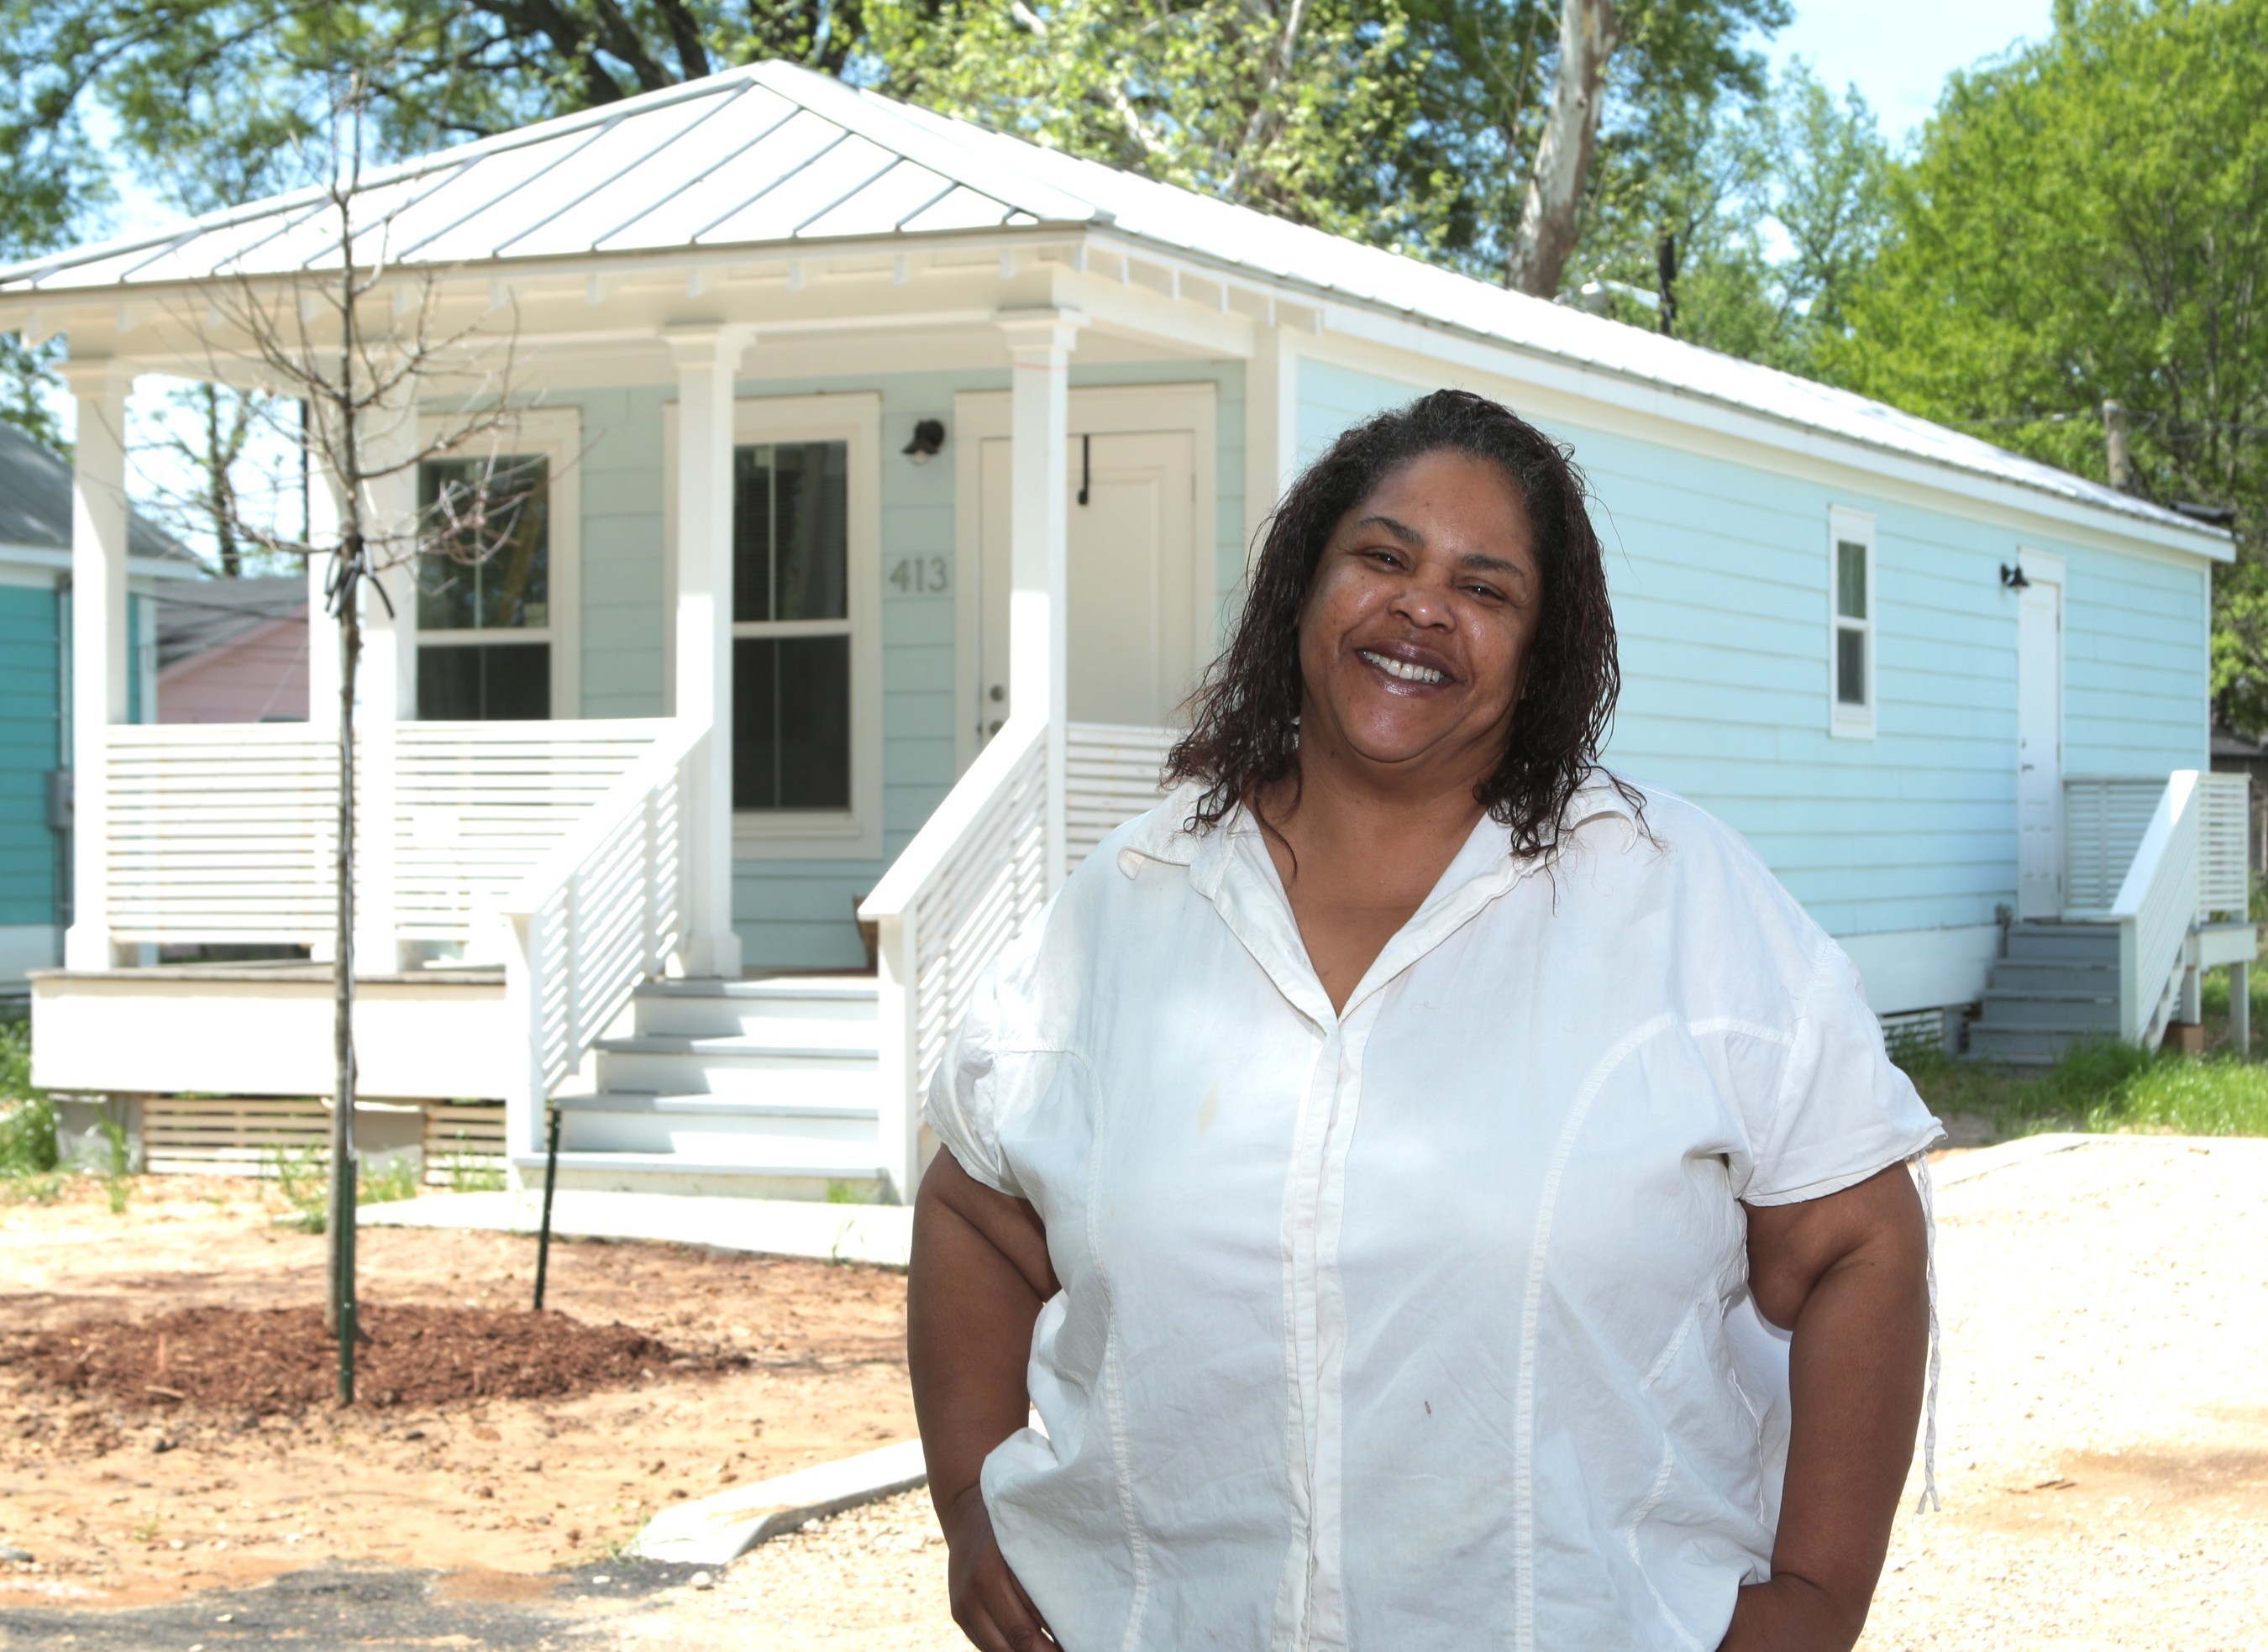 Brenda Gray, 54, of Greenwood's Baptist Town Cottages, was awarded a $4,000 Homebuyer Equity Leverage Partnership (HELP) grant that was used toward her down payment. HELP grants are offered by the Federal Home Loan Bank of Dallas (FHLB Dallas) through its members, including Planters Bank & Trust Company. The program provides grants to assist income-qualified, first-time homebuyers with down payments and closing costs on new or existing homes.